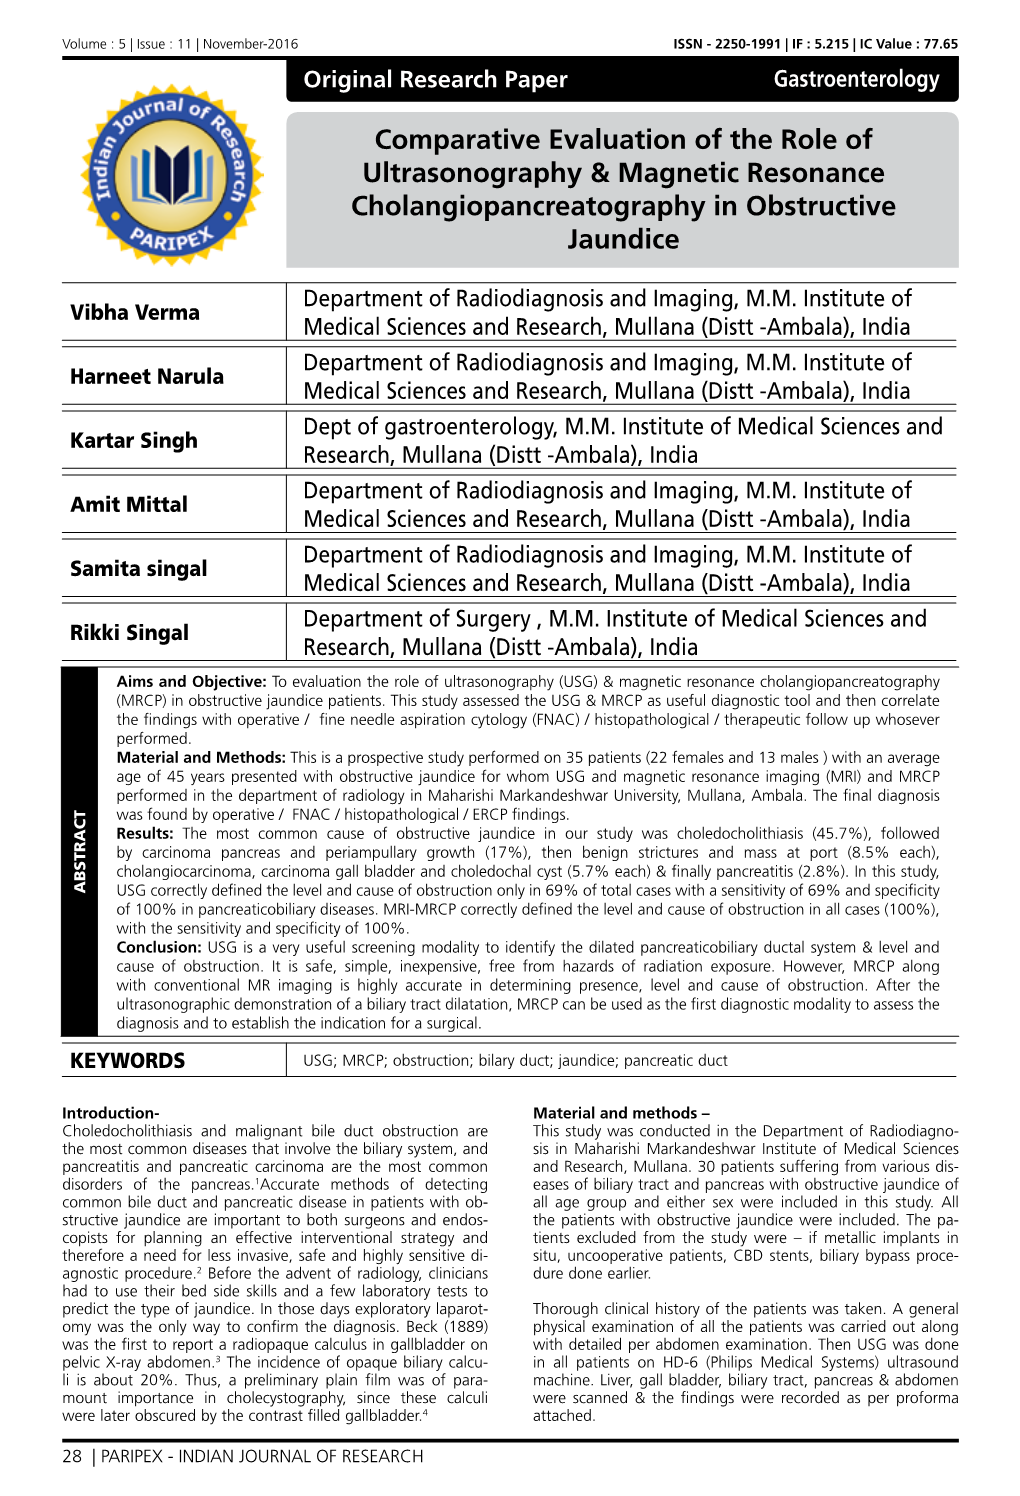 Comparative Evaluation of the Role of Ultrasonography & Magnetic Resonance Cholangiopancreatography in Obstructive Jaundice